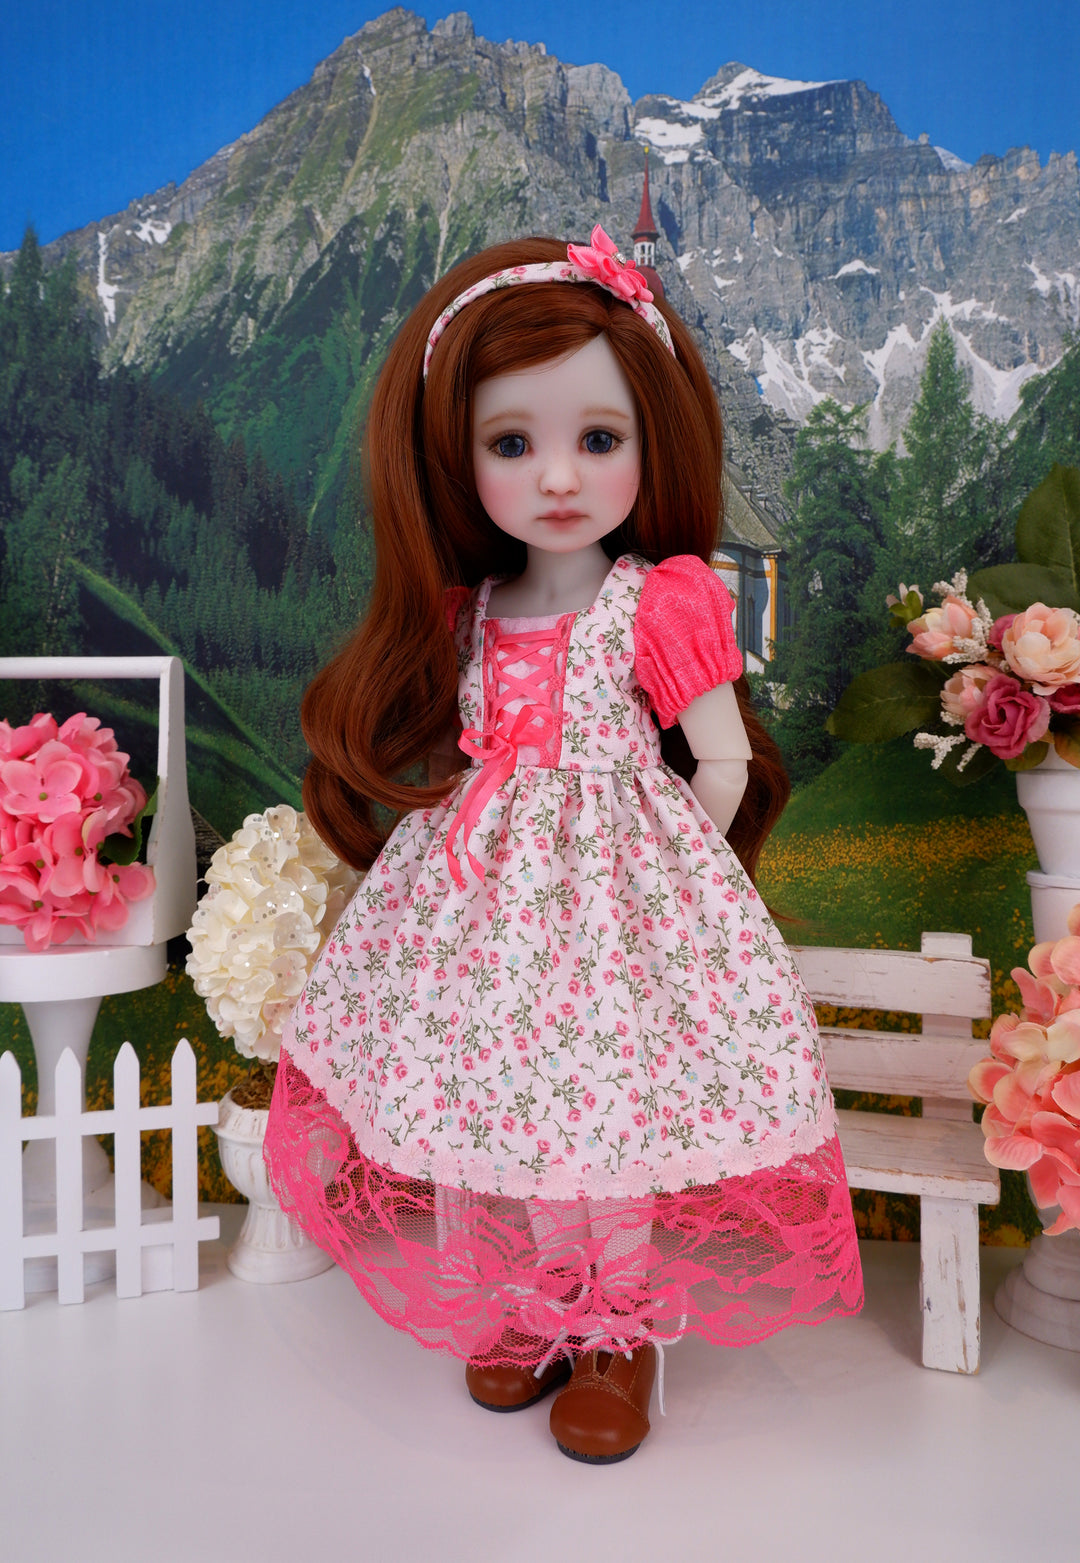 Alpine Summer - dirndl dress ensemble with boots for Ruby Red Fashion Friends doll